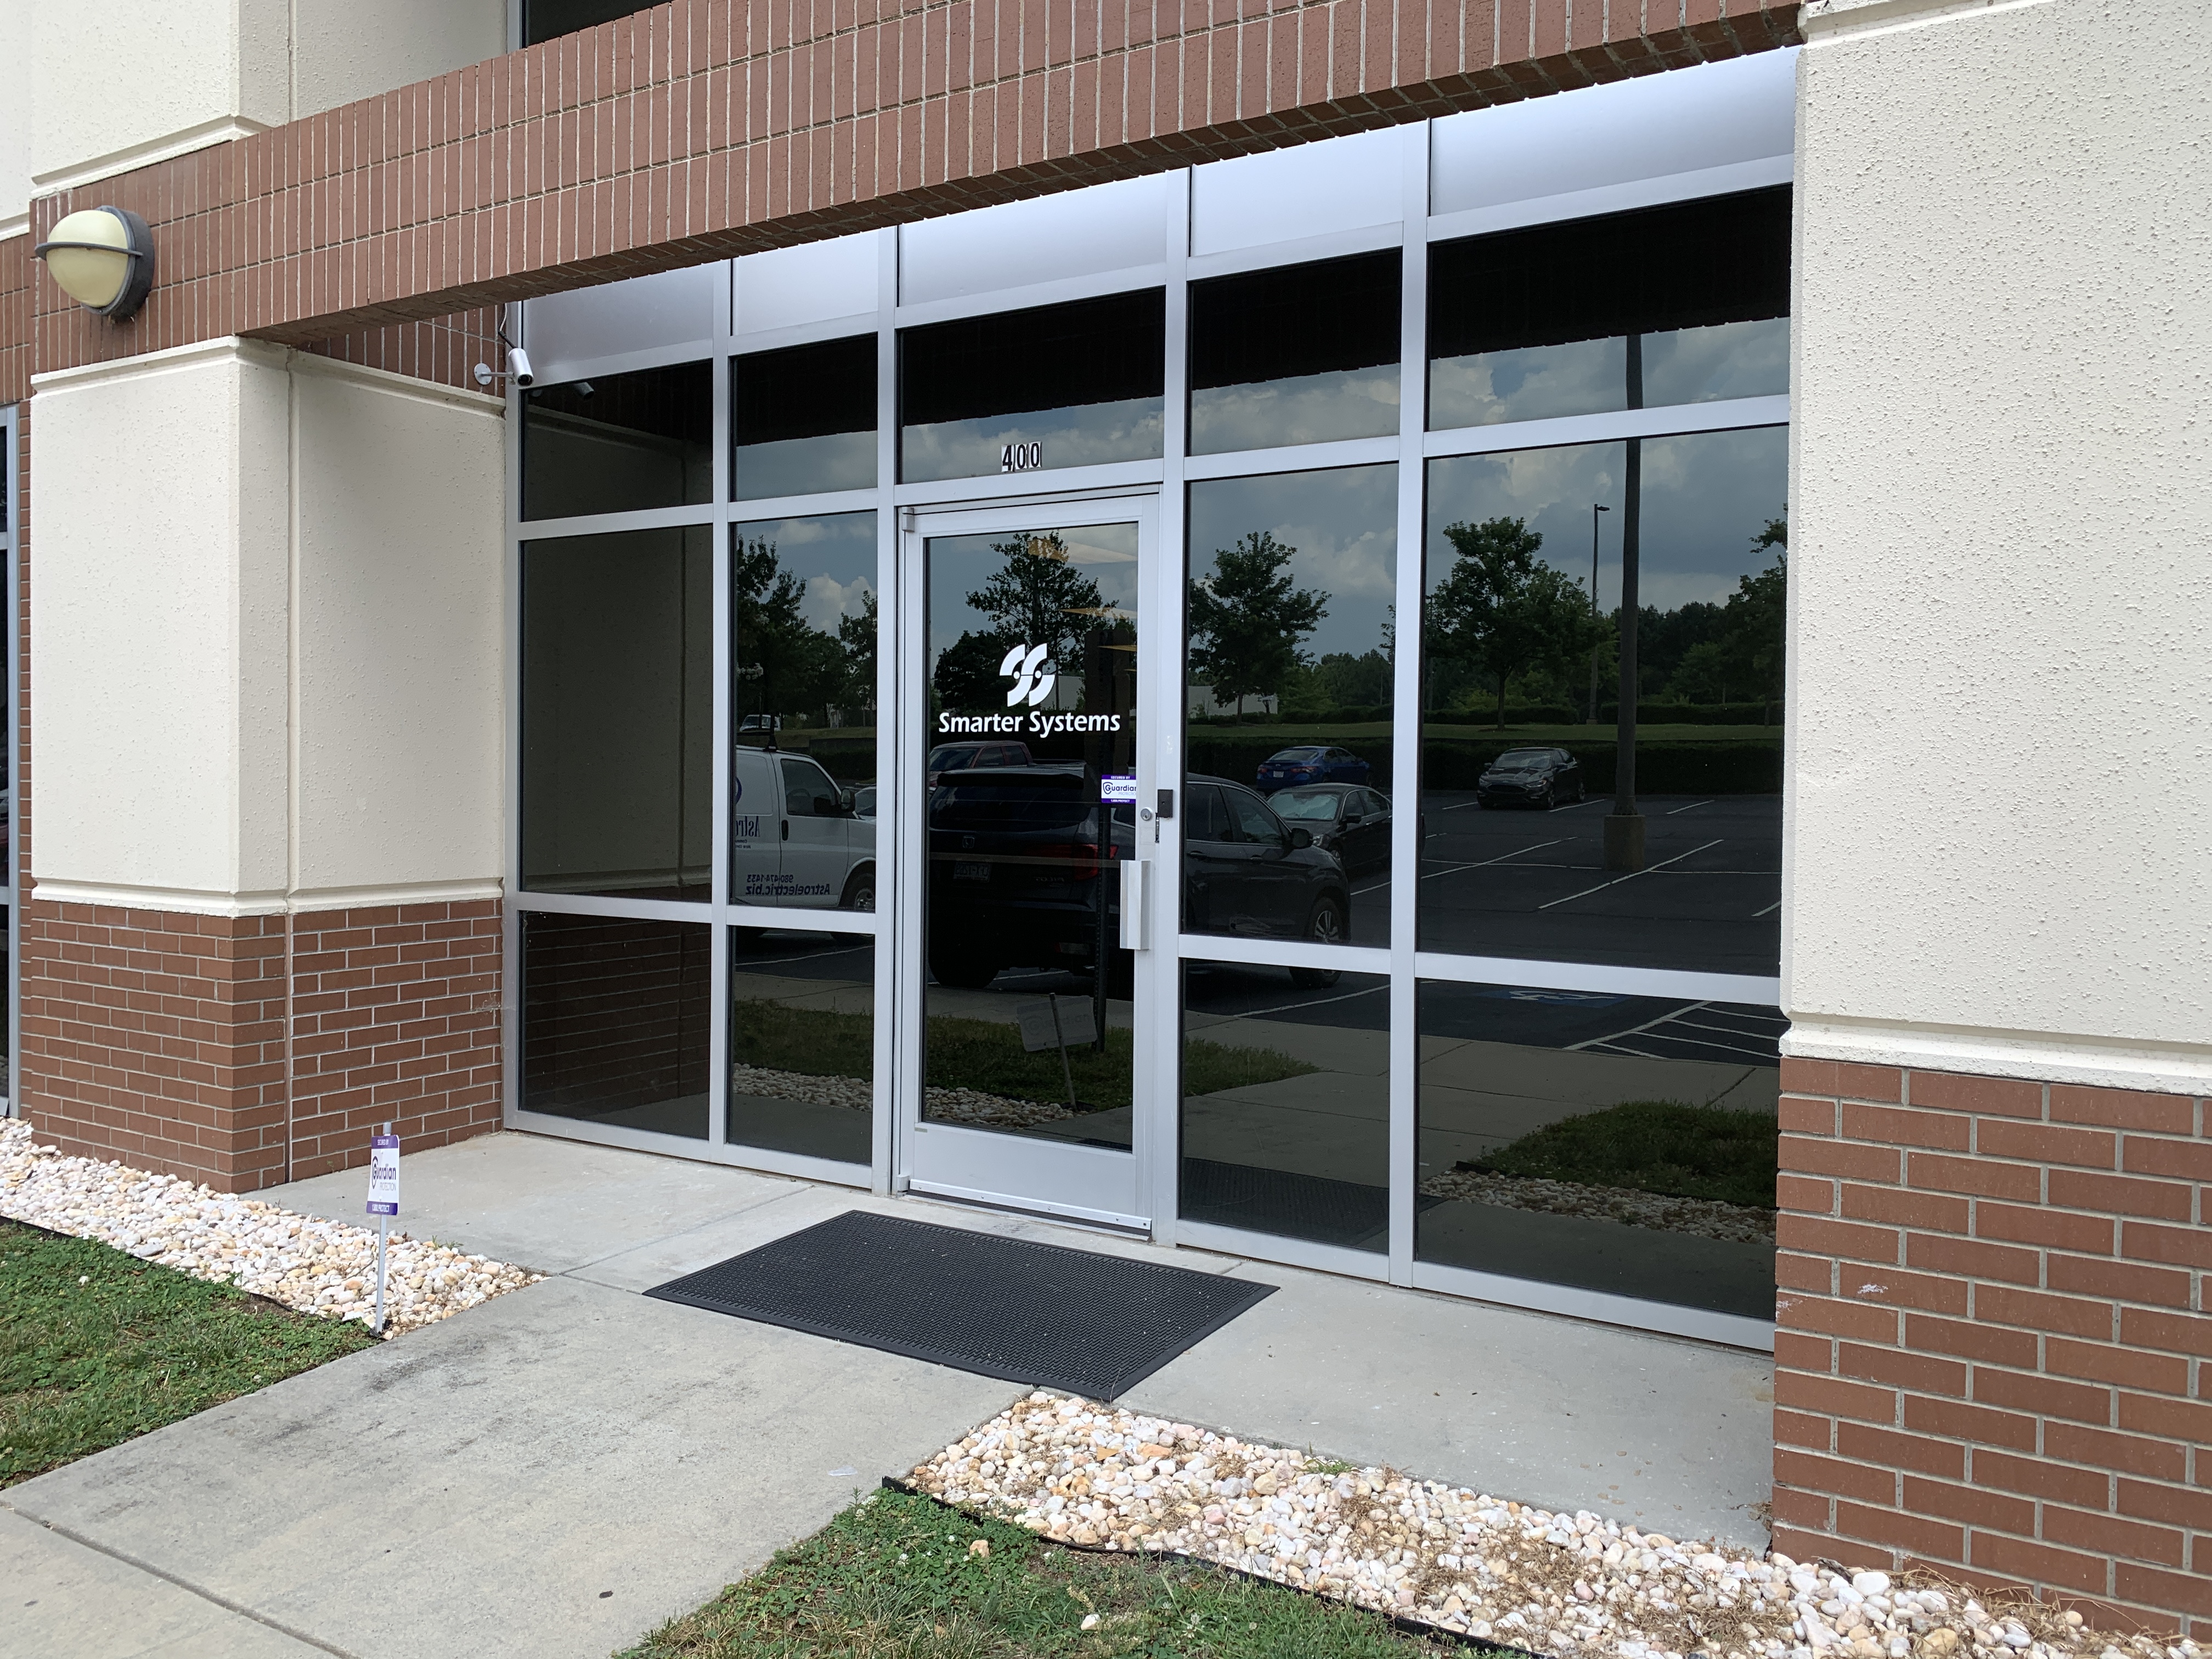 Smarter Systems new southwest Charlotte location